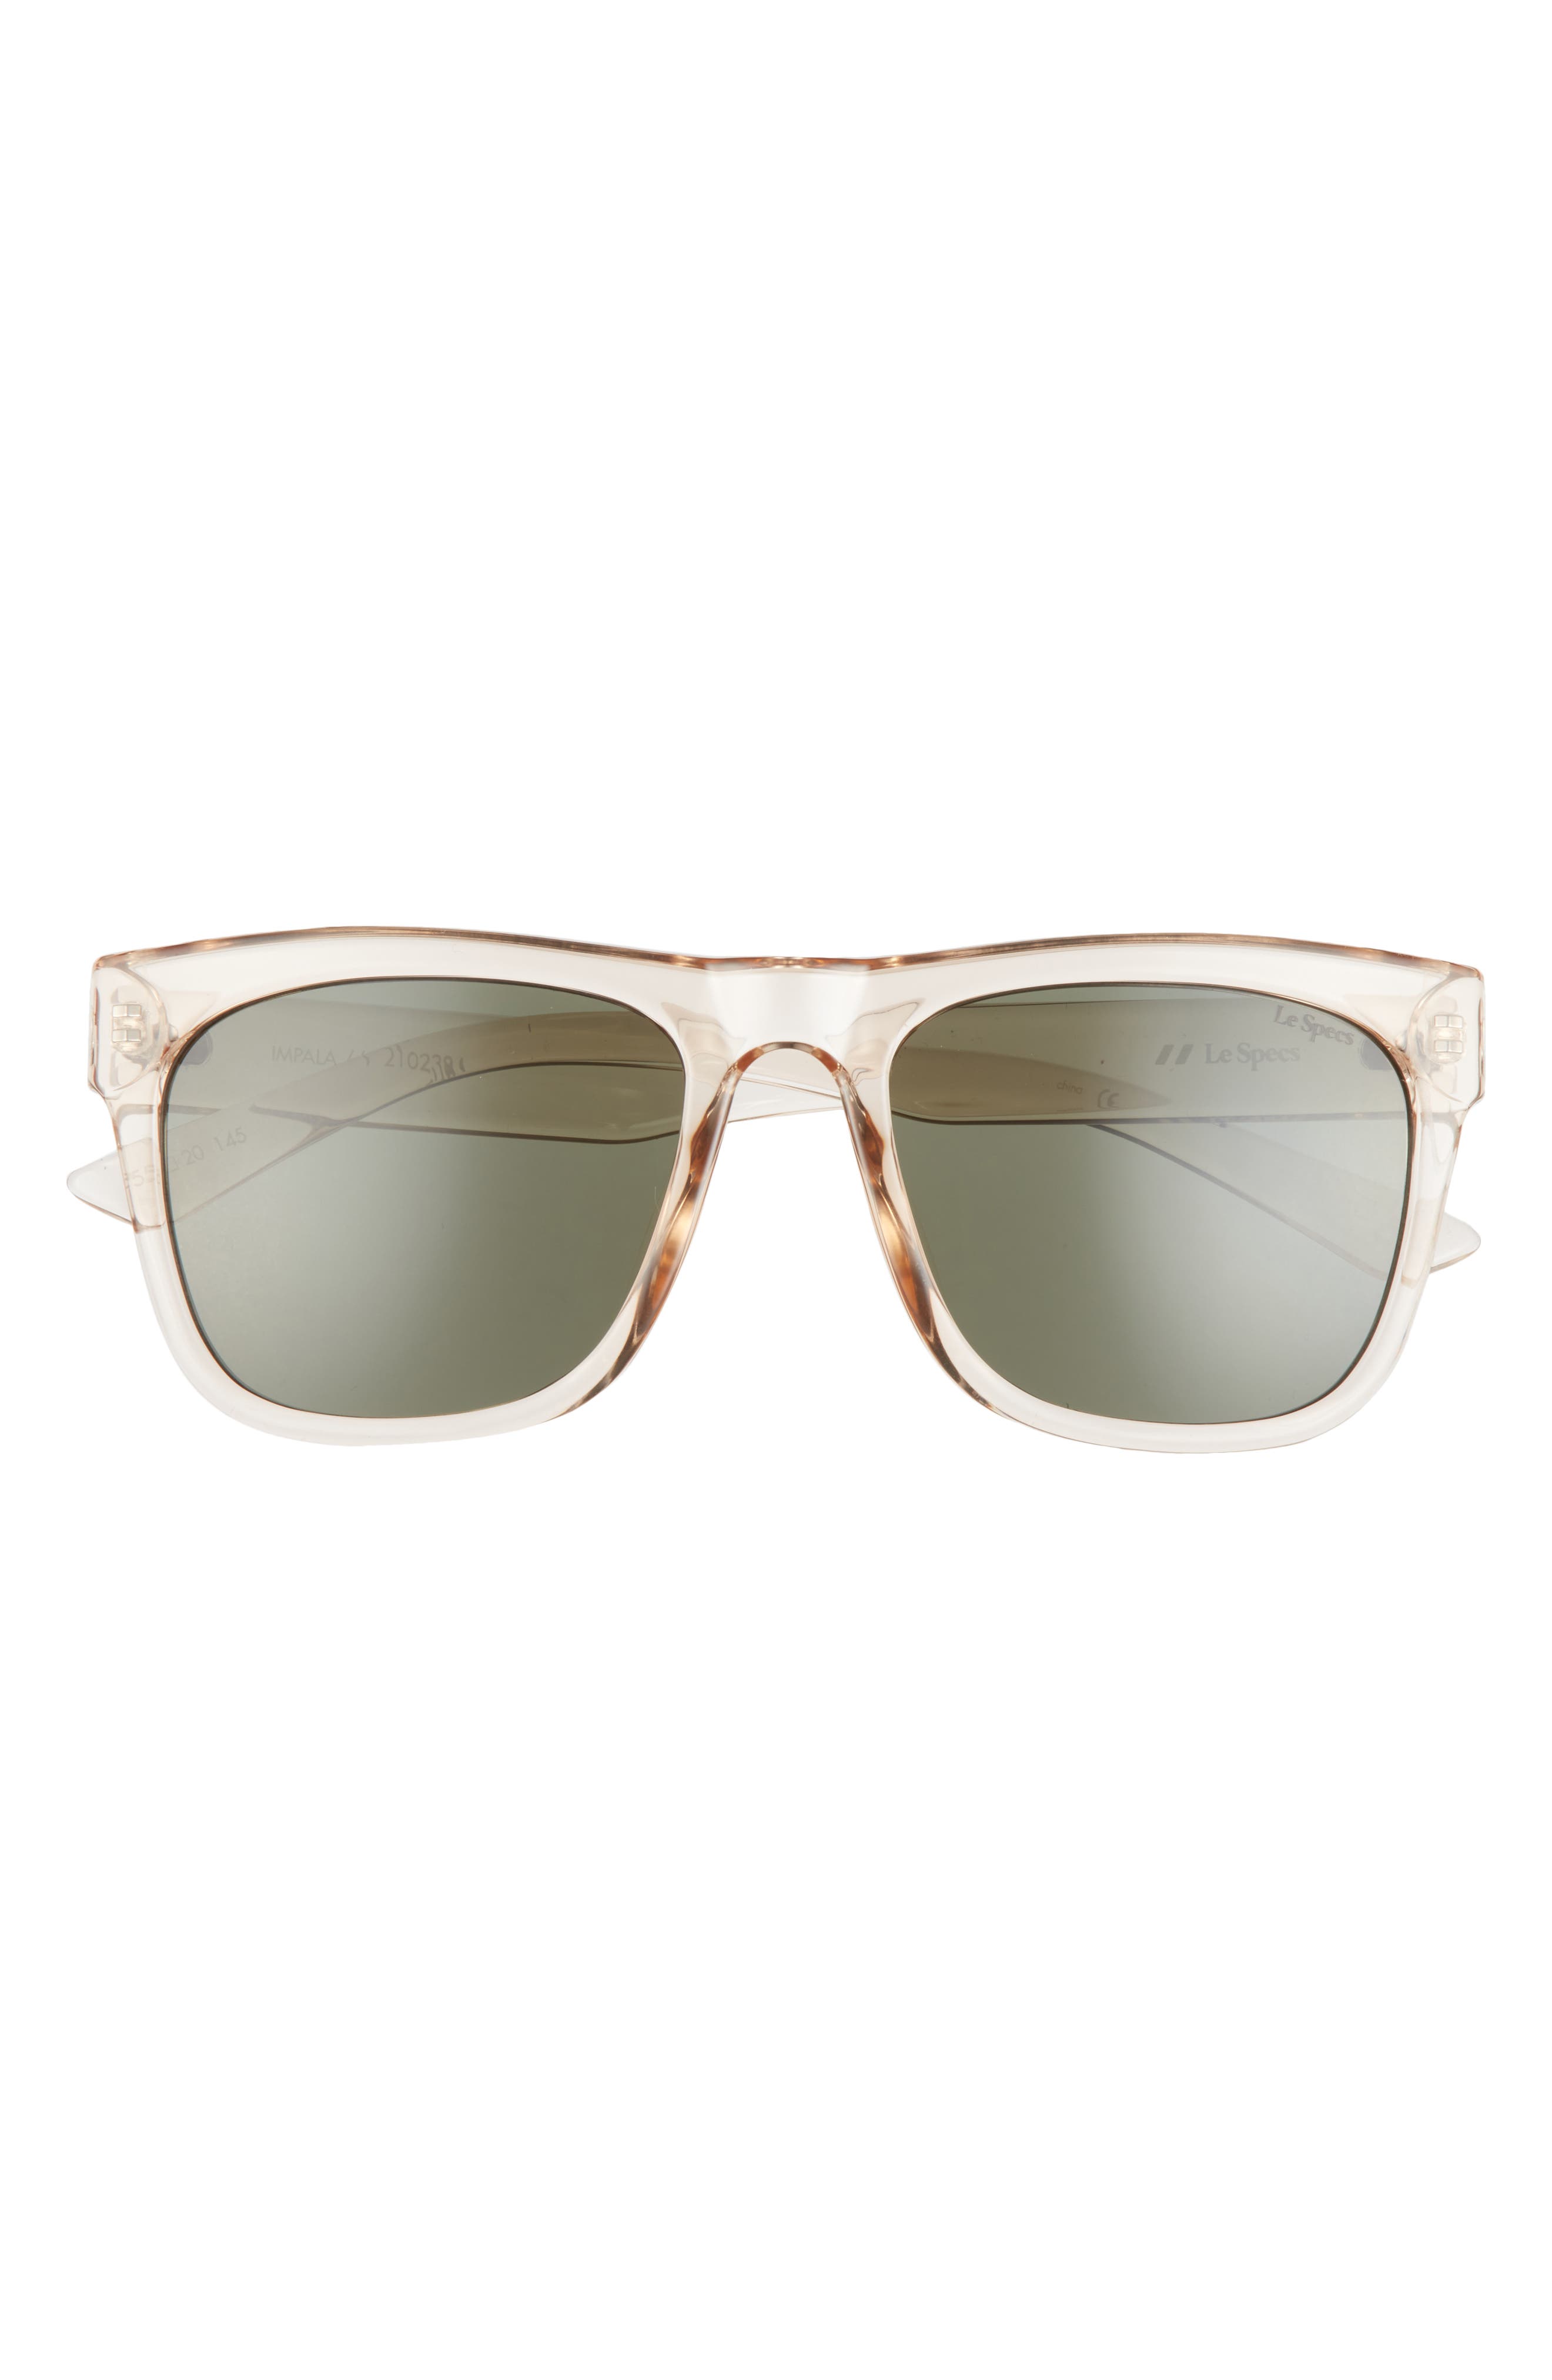 Le Specs Impala 55mm Rectangle Sunglasses in Sand /Green Mono at Nordstrom